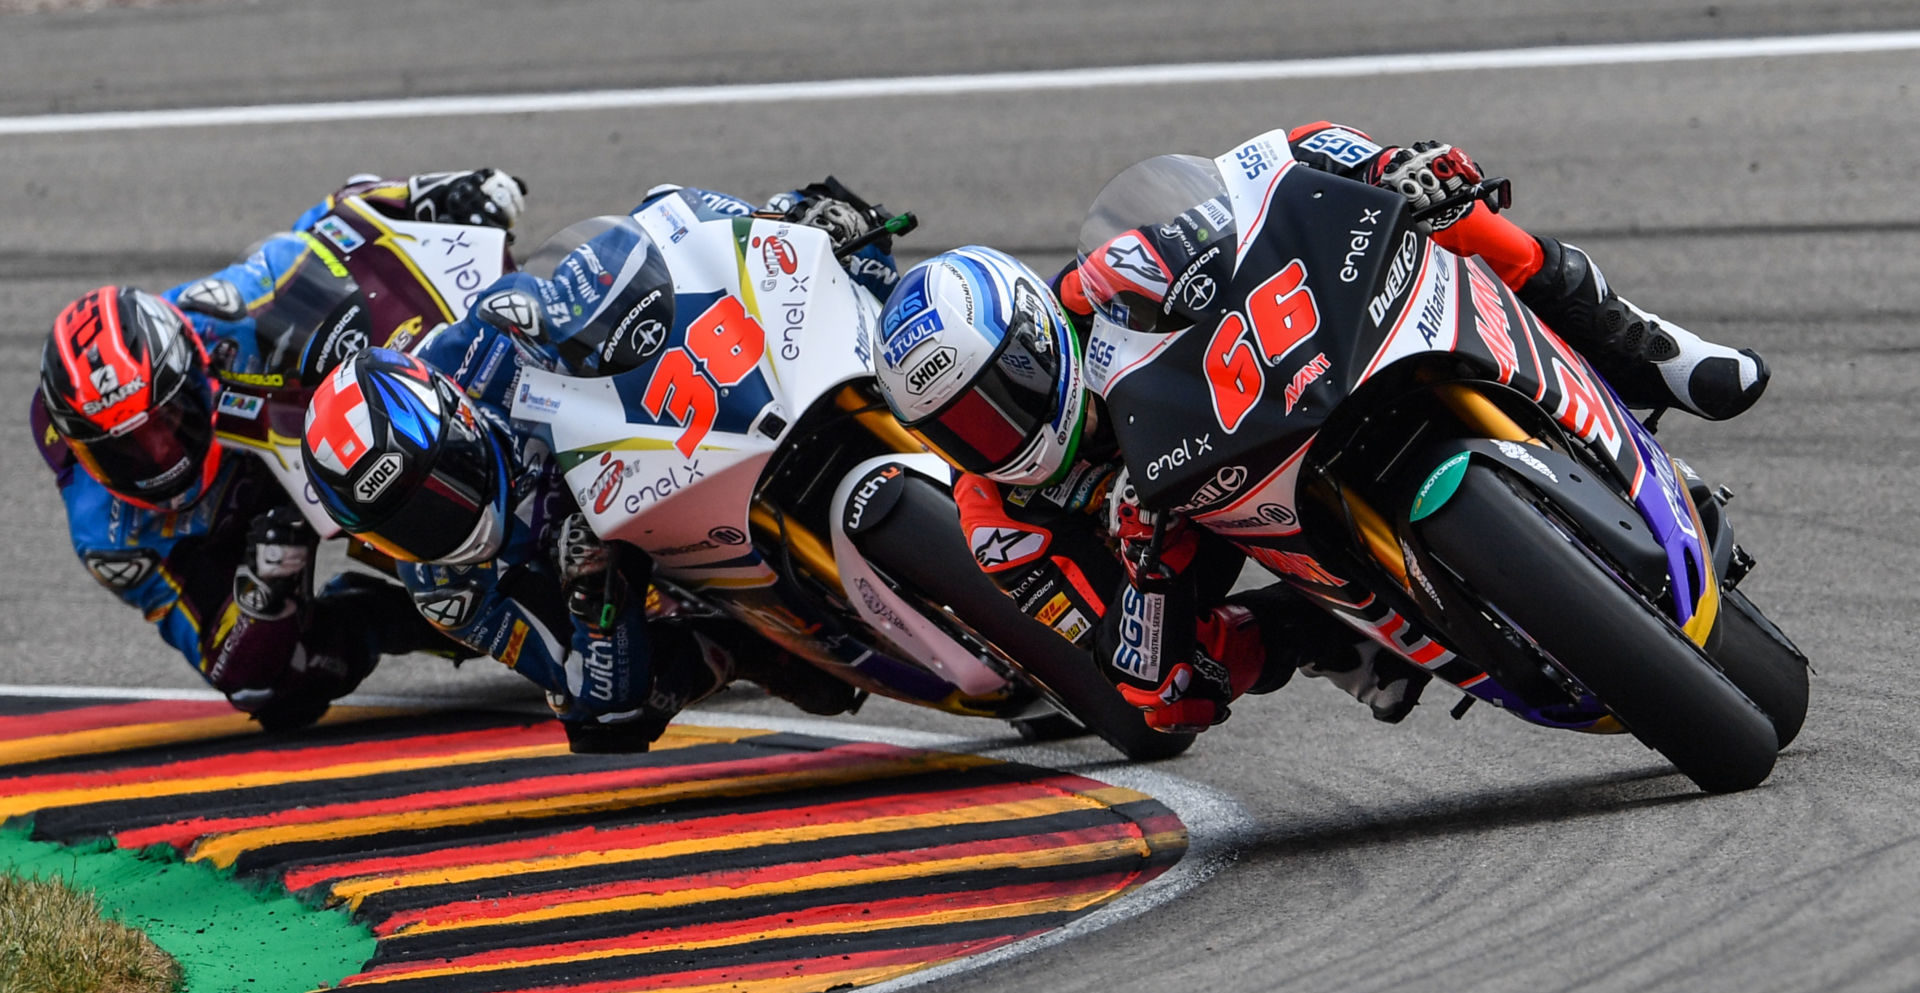 Action from the start of the FIM MotoE World Cup race at Sachsenring. Photo courtesy of Energica.